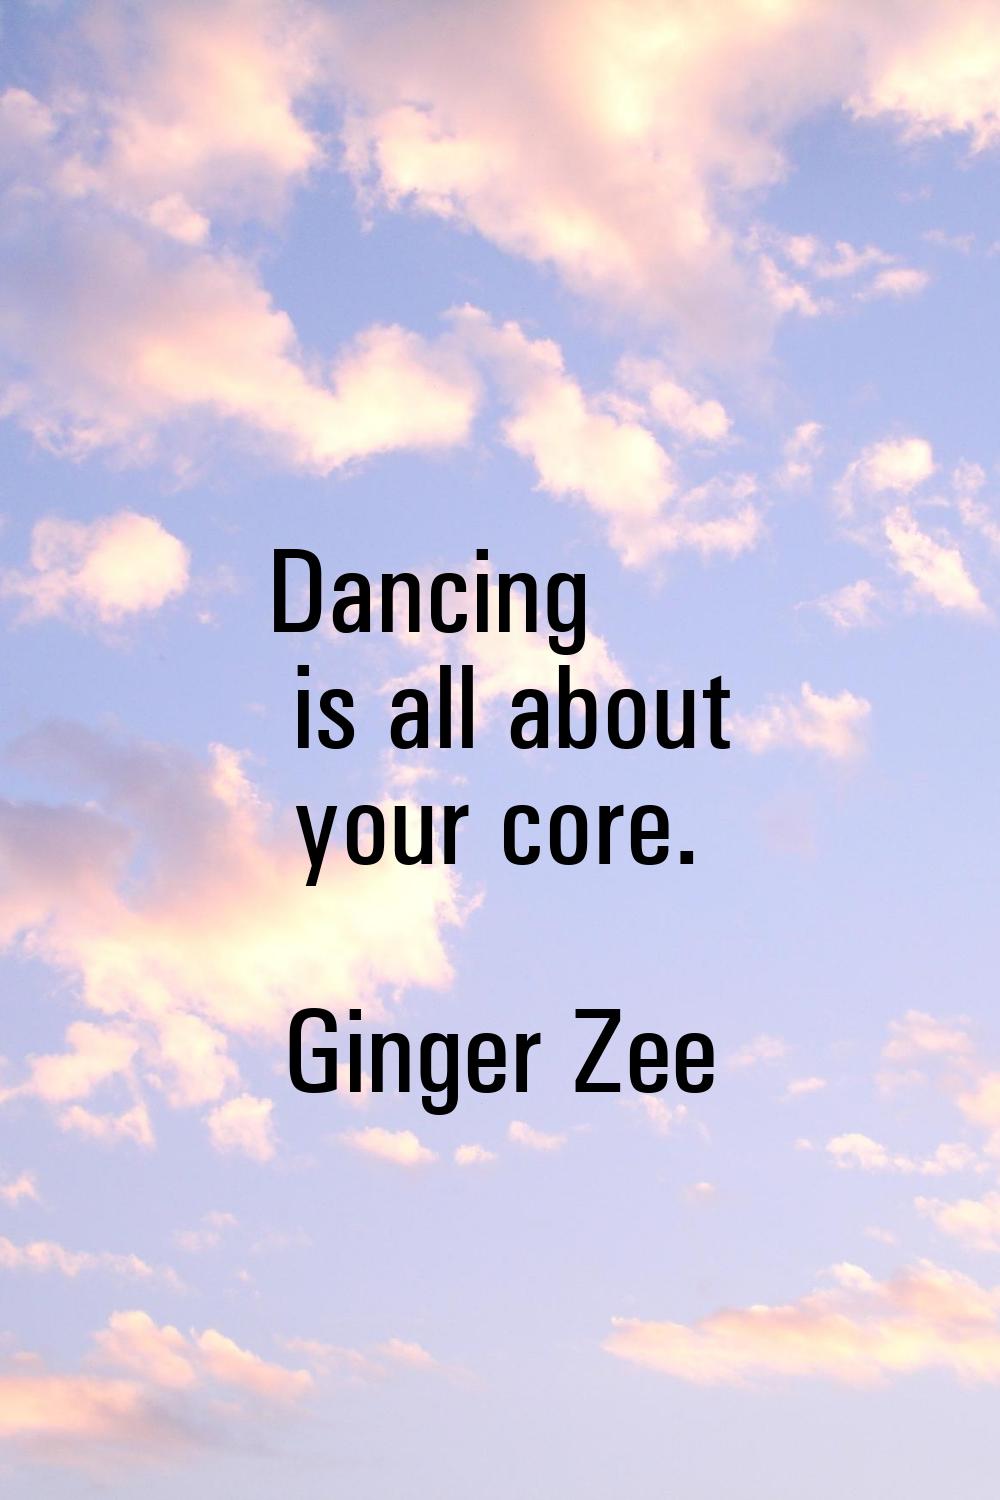 Dancing is all about your core.